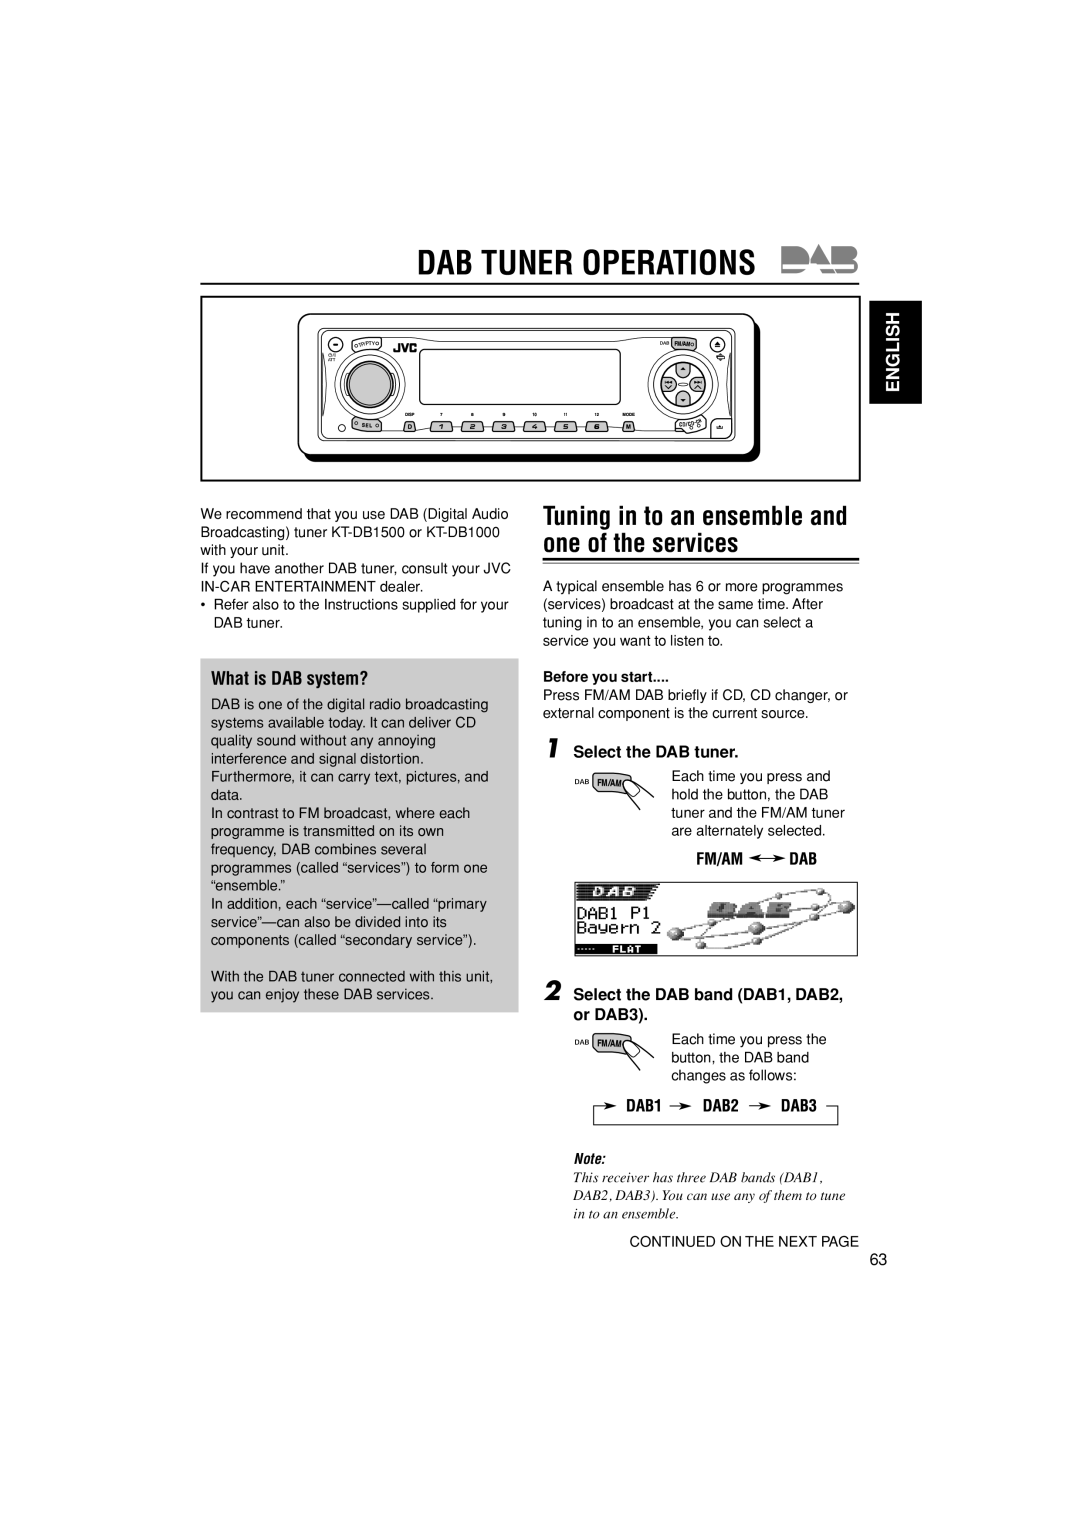 JVC KD-LH401 Dab Tuner Operations, Tuning in to an ensemble and one of the services, What is DAB system?, English 